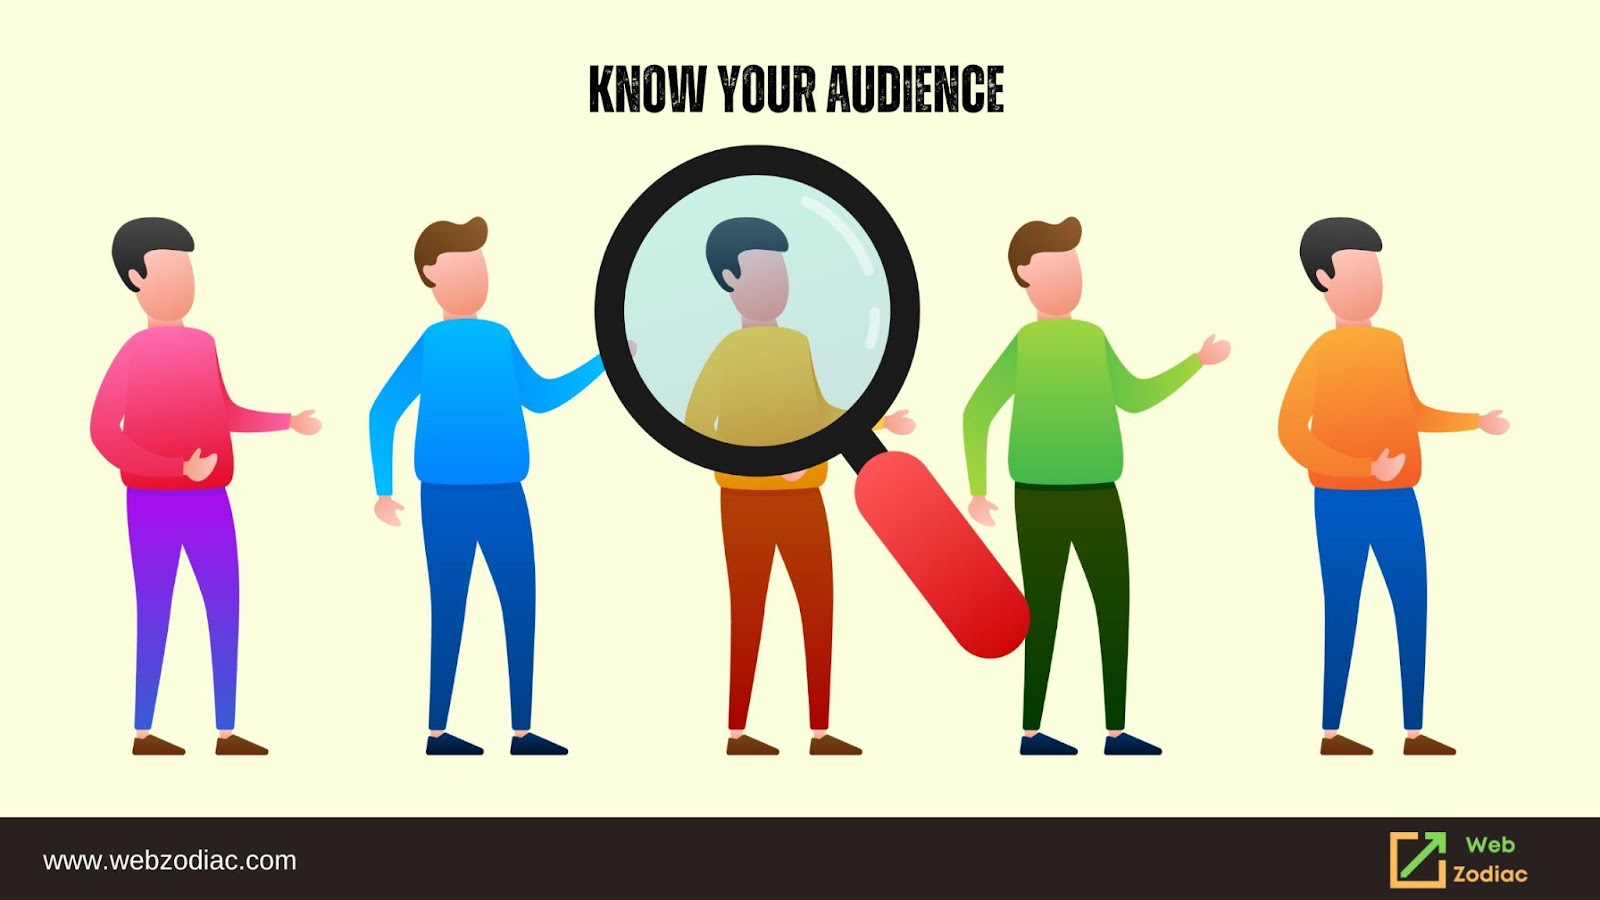 Know the audience image